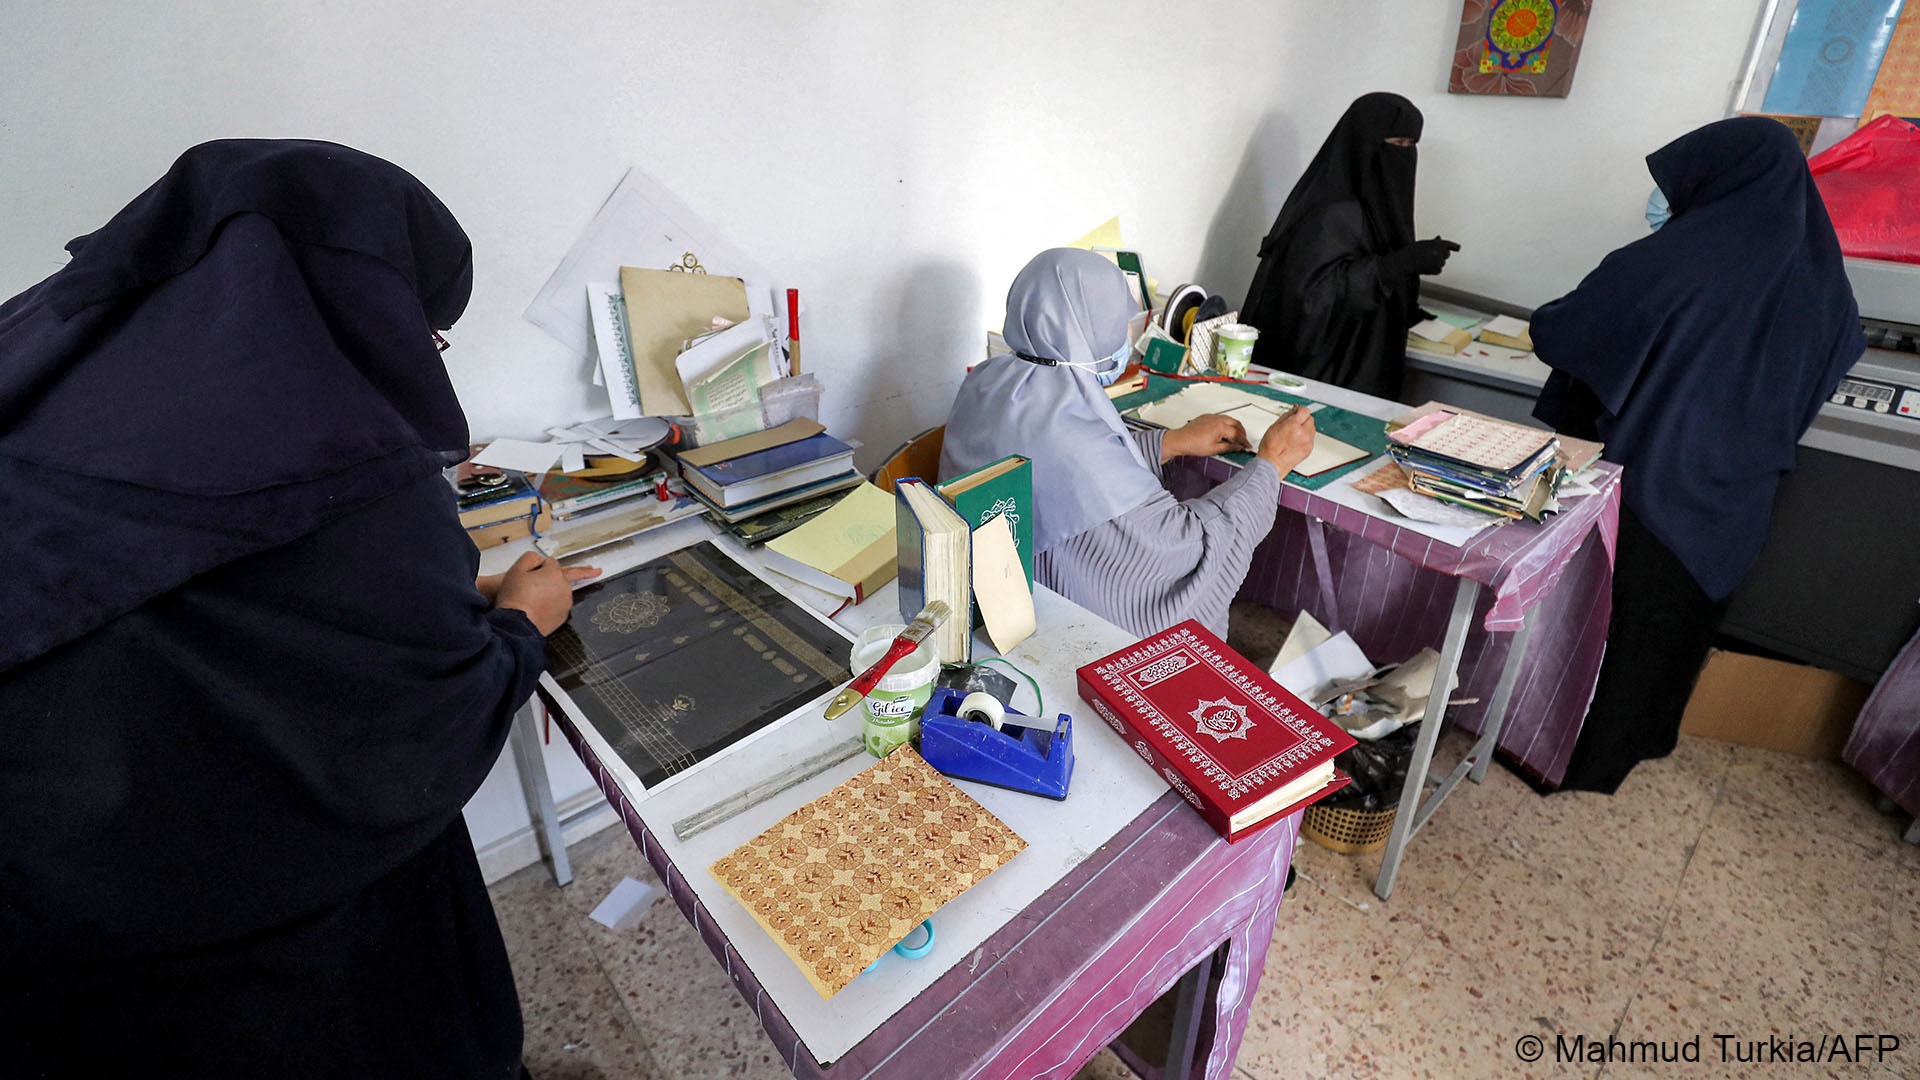  Women have increasingly become involved in the restoration of Korans in Libya, even holding training workshops to teach blind women how to restore copies (photo: Mahmud Turkia/AFP) 